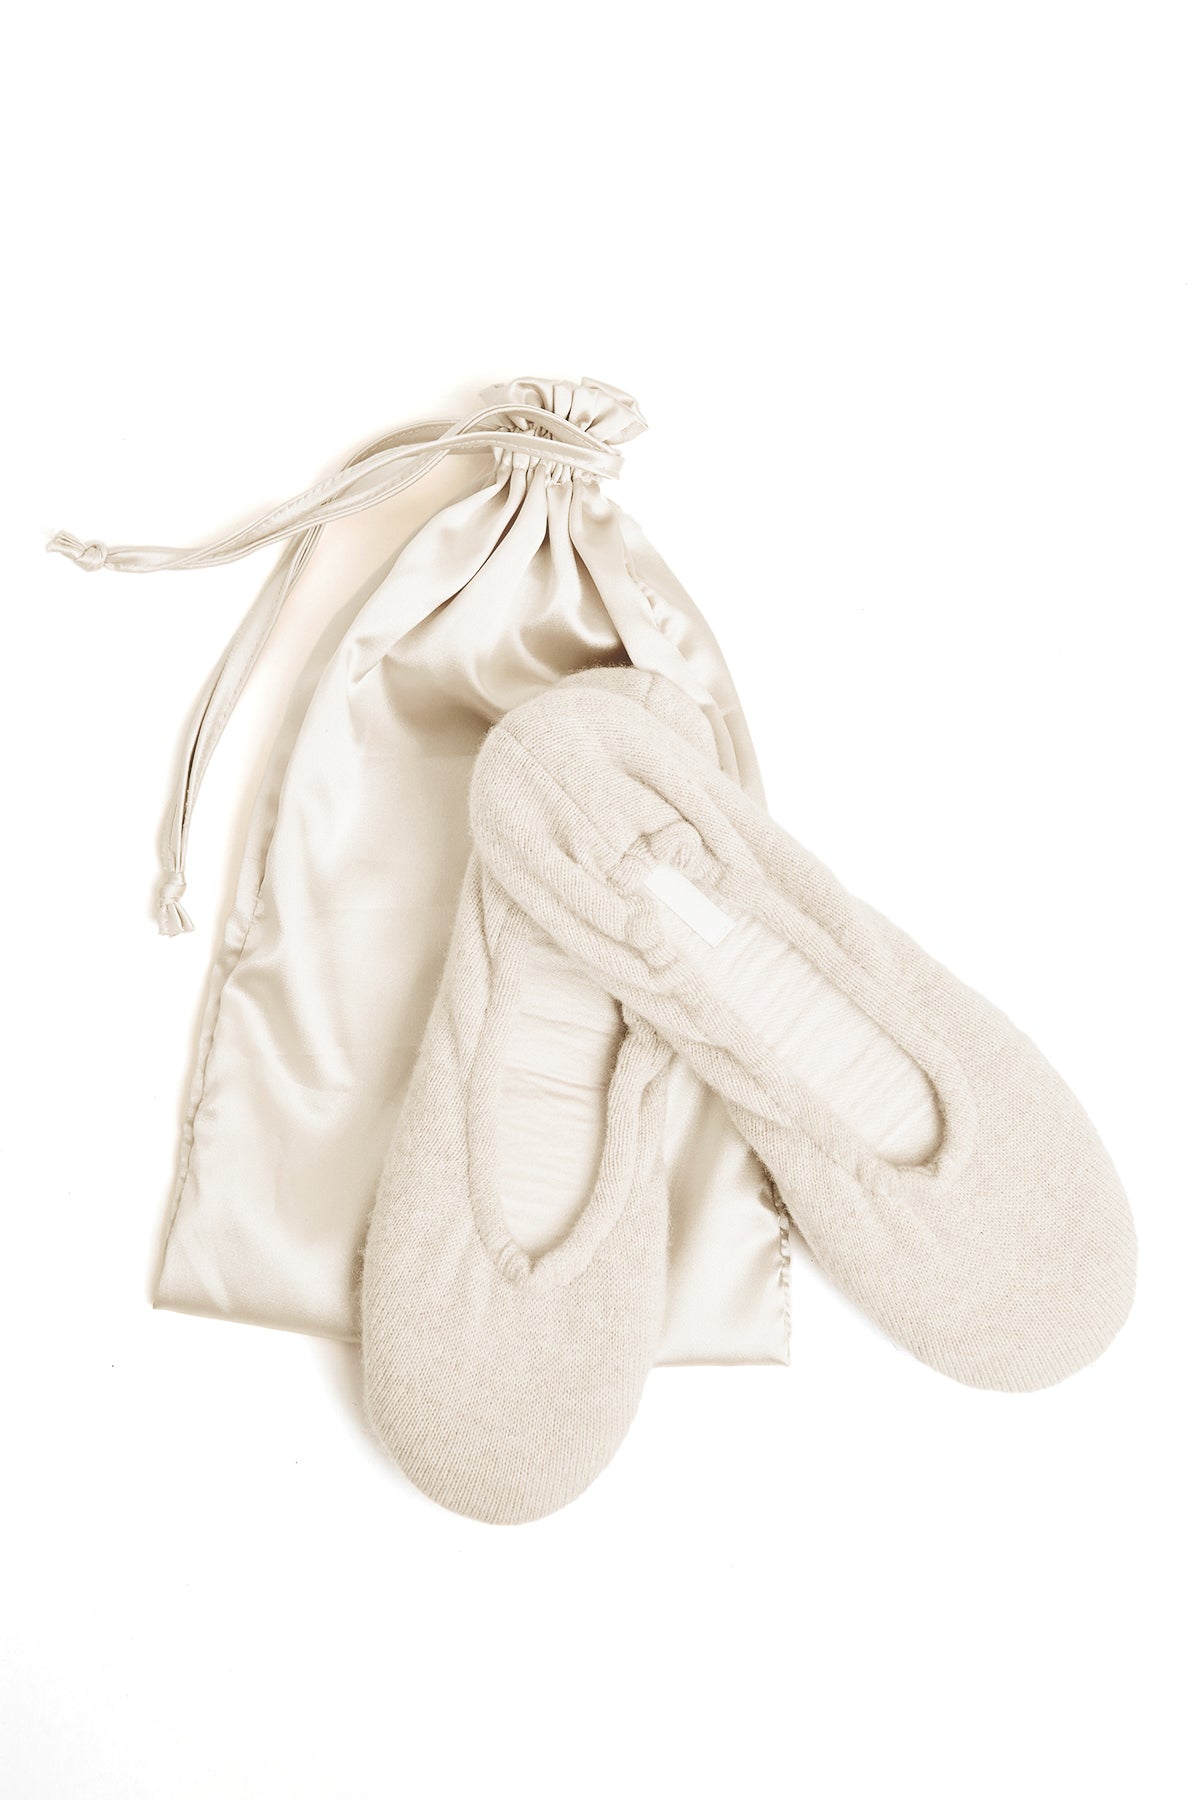 A pair of Skin cashmere ballet flat slippers and a bag on a timeless white surface.-15274767548609